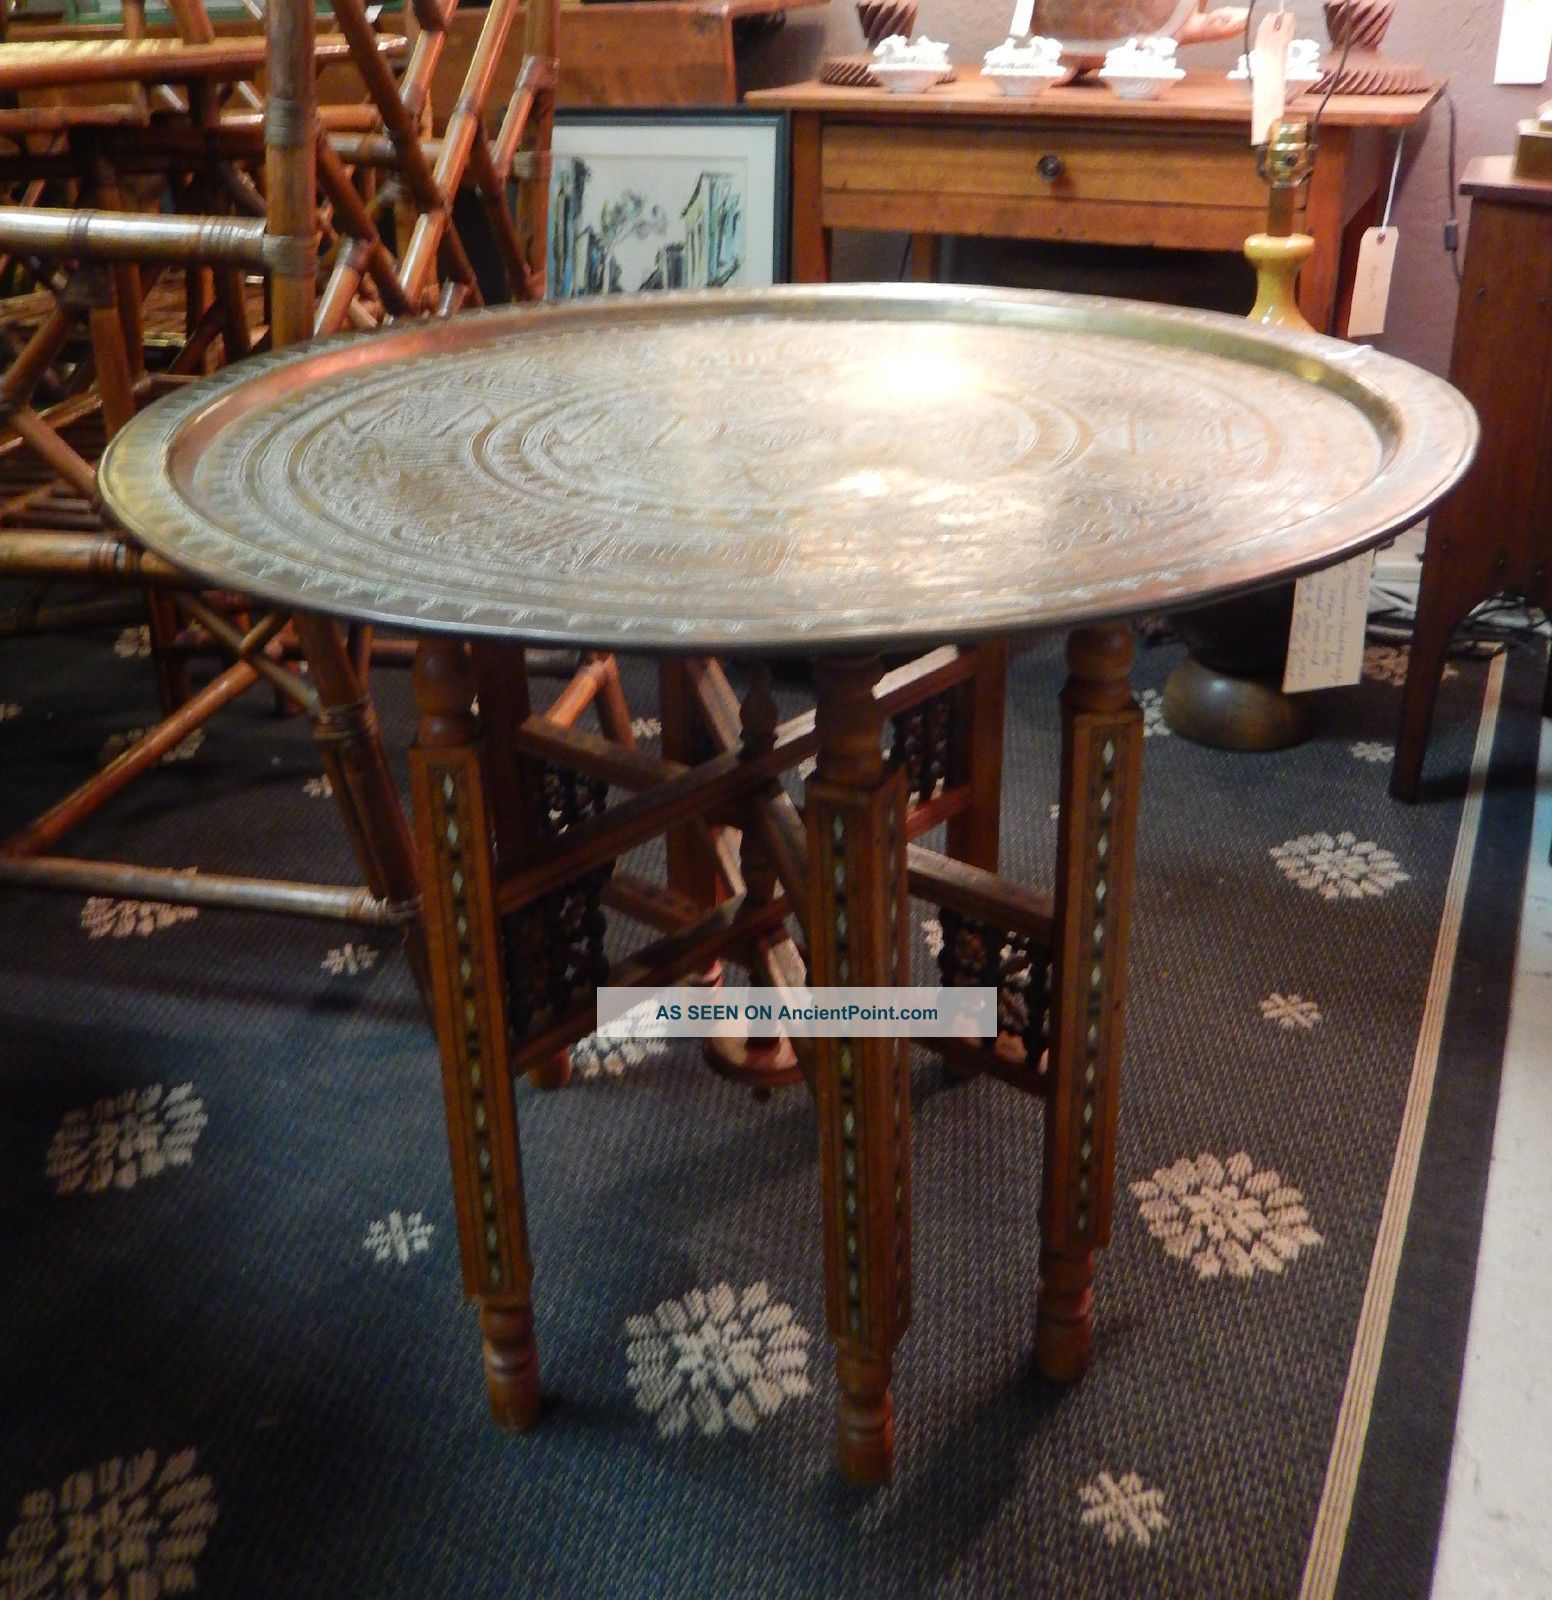 Vintage Moroccan Arabesque Indian Etched Brass Tray Table Intricate Inlaid Base Post-1950 photo